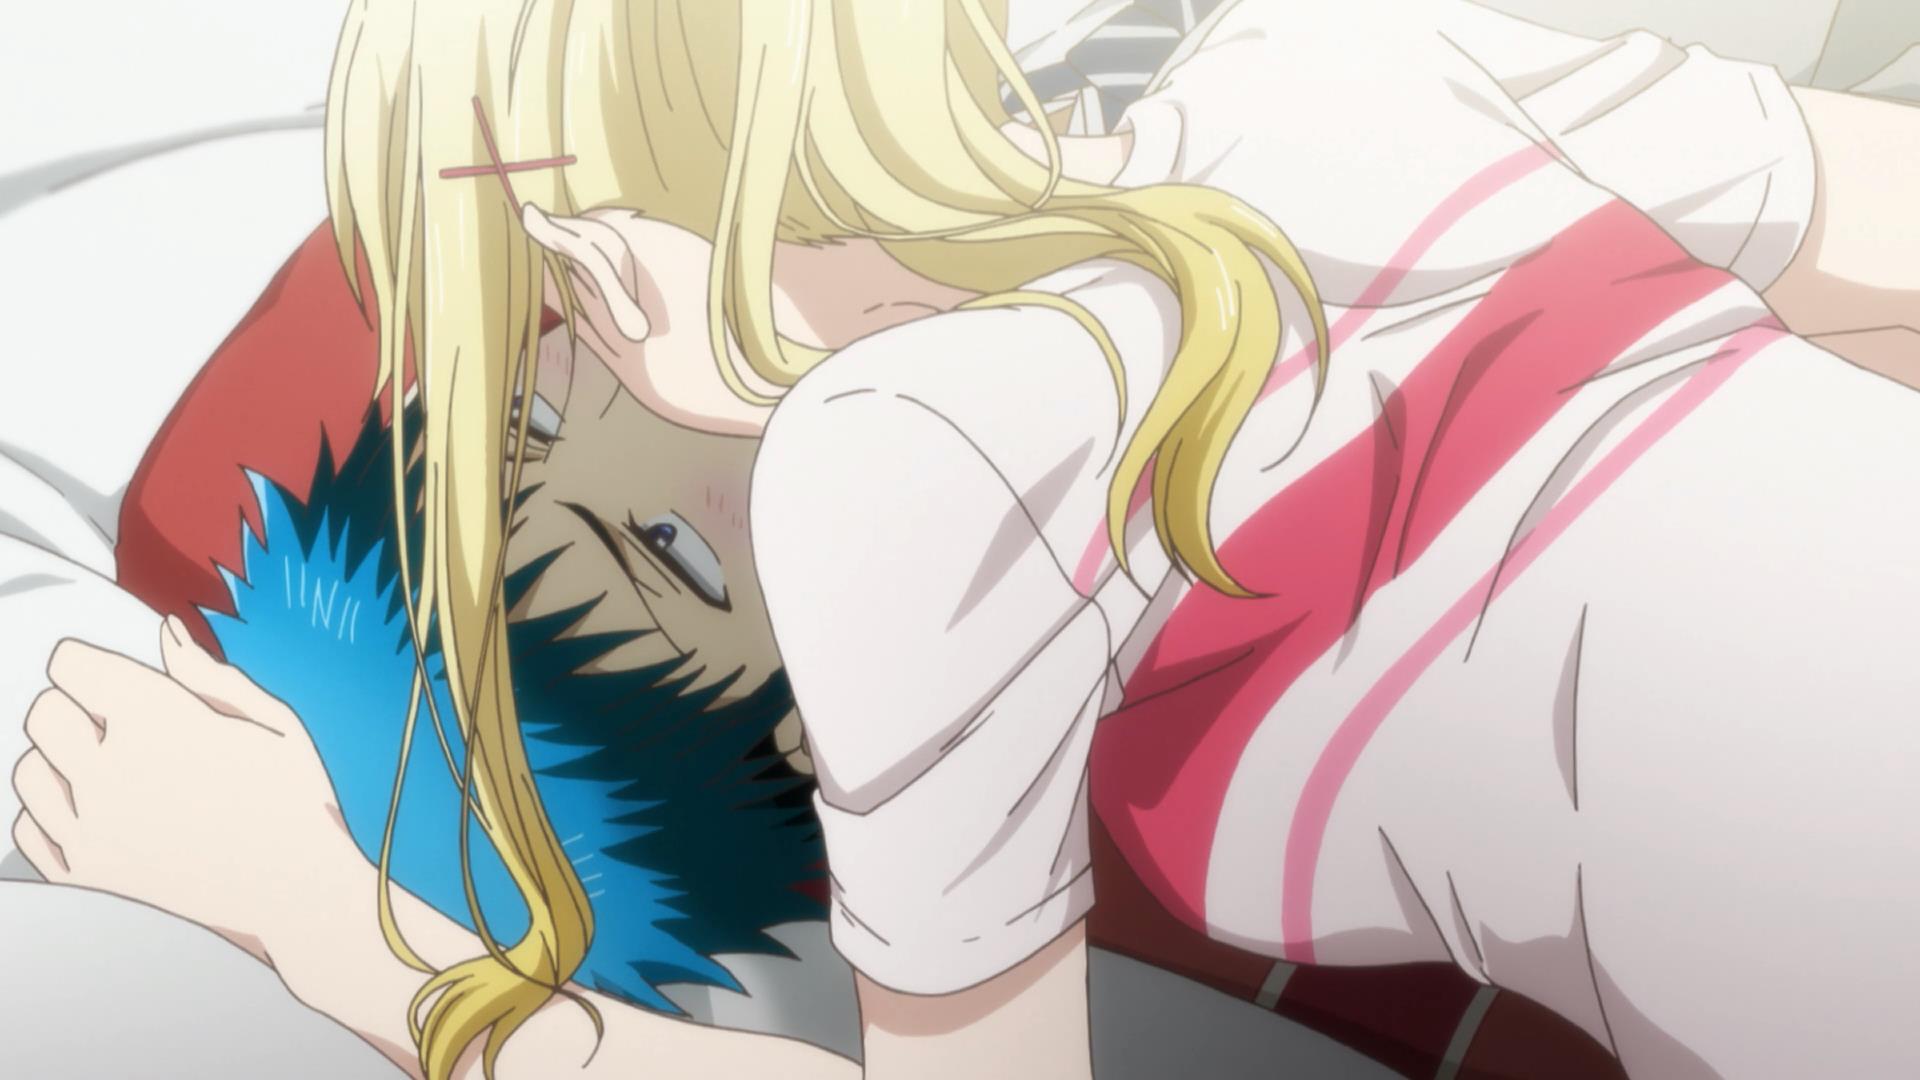 [HorribleSubs]_Yamada-kun_and_the_Seven_Witches_-_04_[1080p].mkv_snapshot_07.29_[2015.05.03_14.29.17]